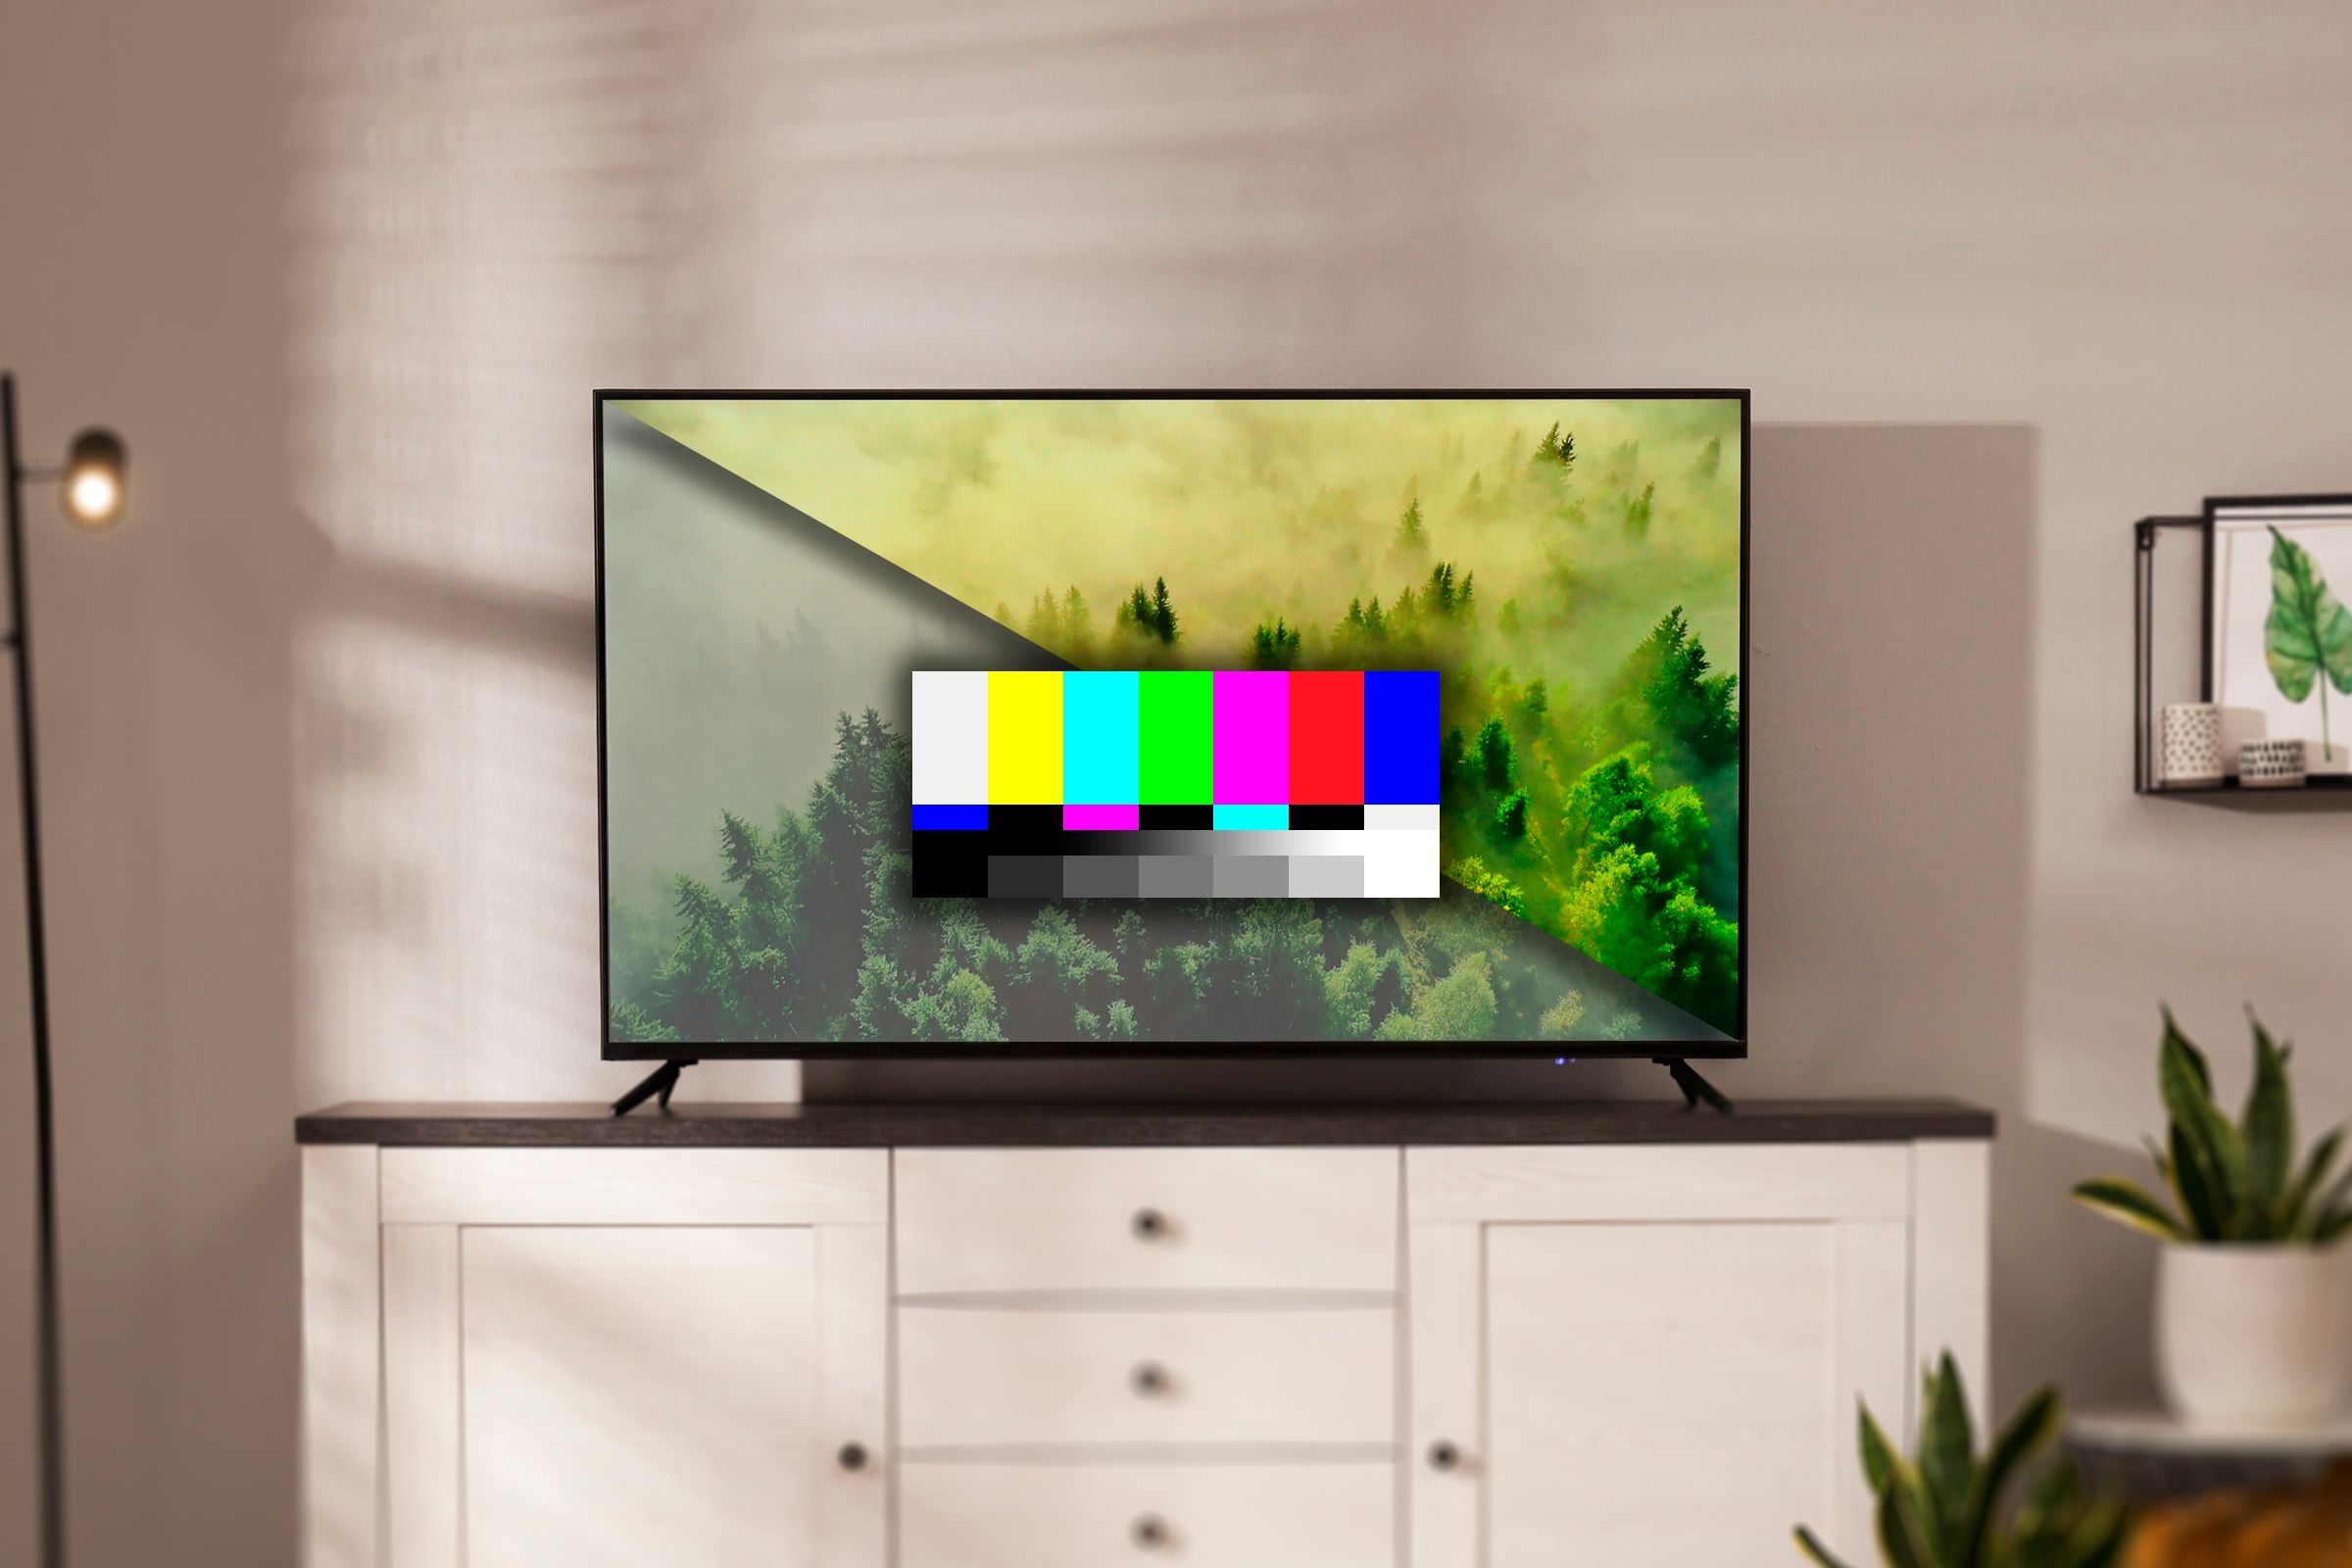 A TV on a shelf with a split screen showing an image with muted colors on the left and more balanced colors on the right, and a test color bars image in the center of the screen.